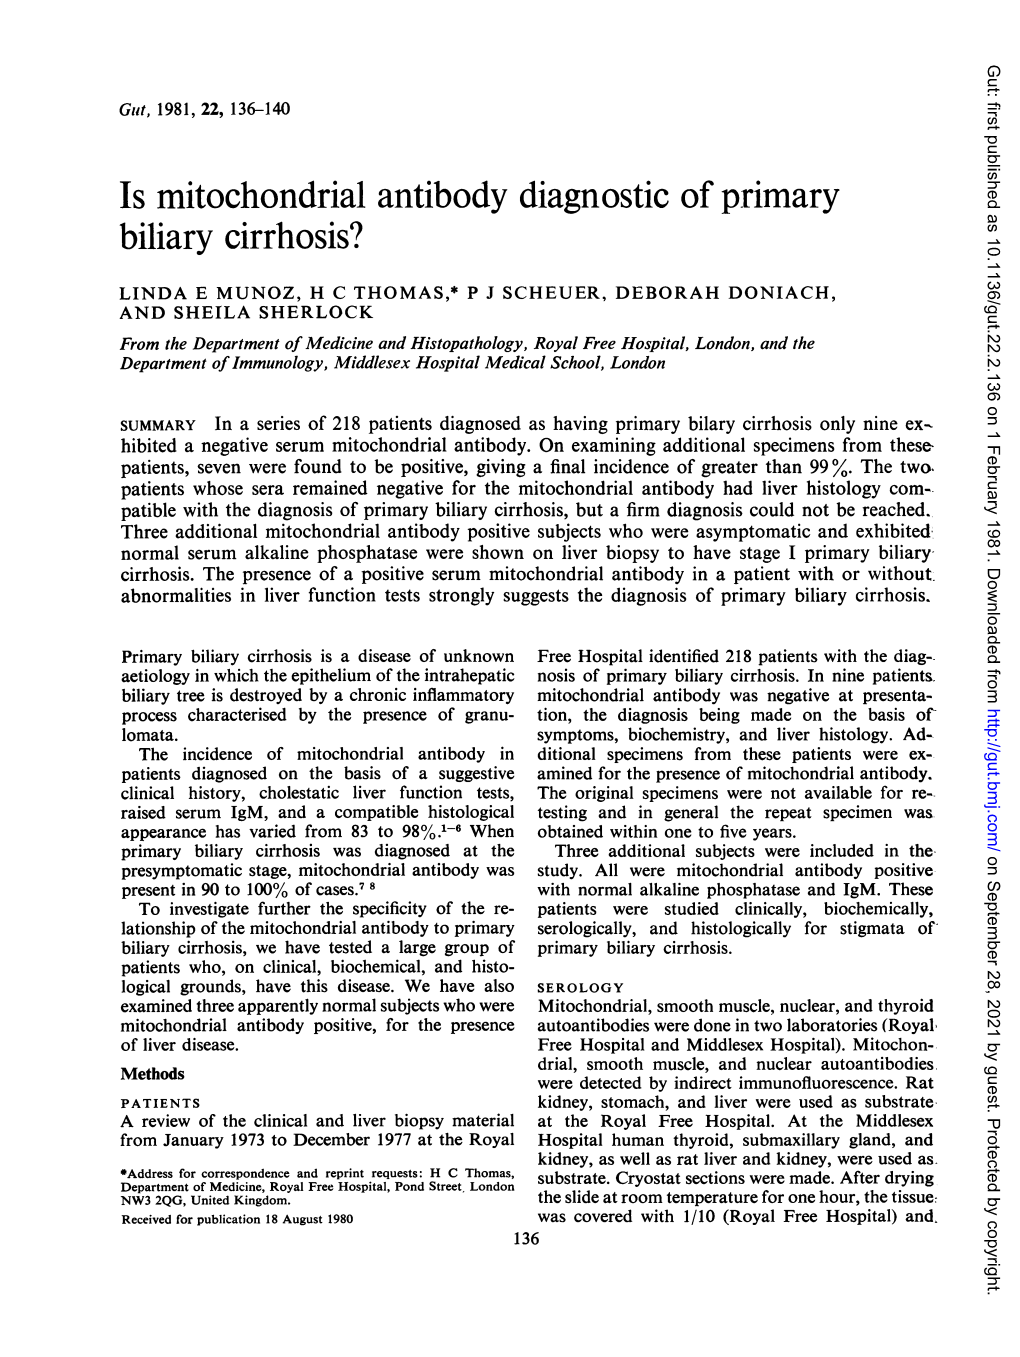 Is Mitochondrial Antibody Diagnostic of Primary Biliary Cirrhosis?